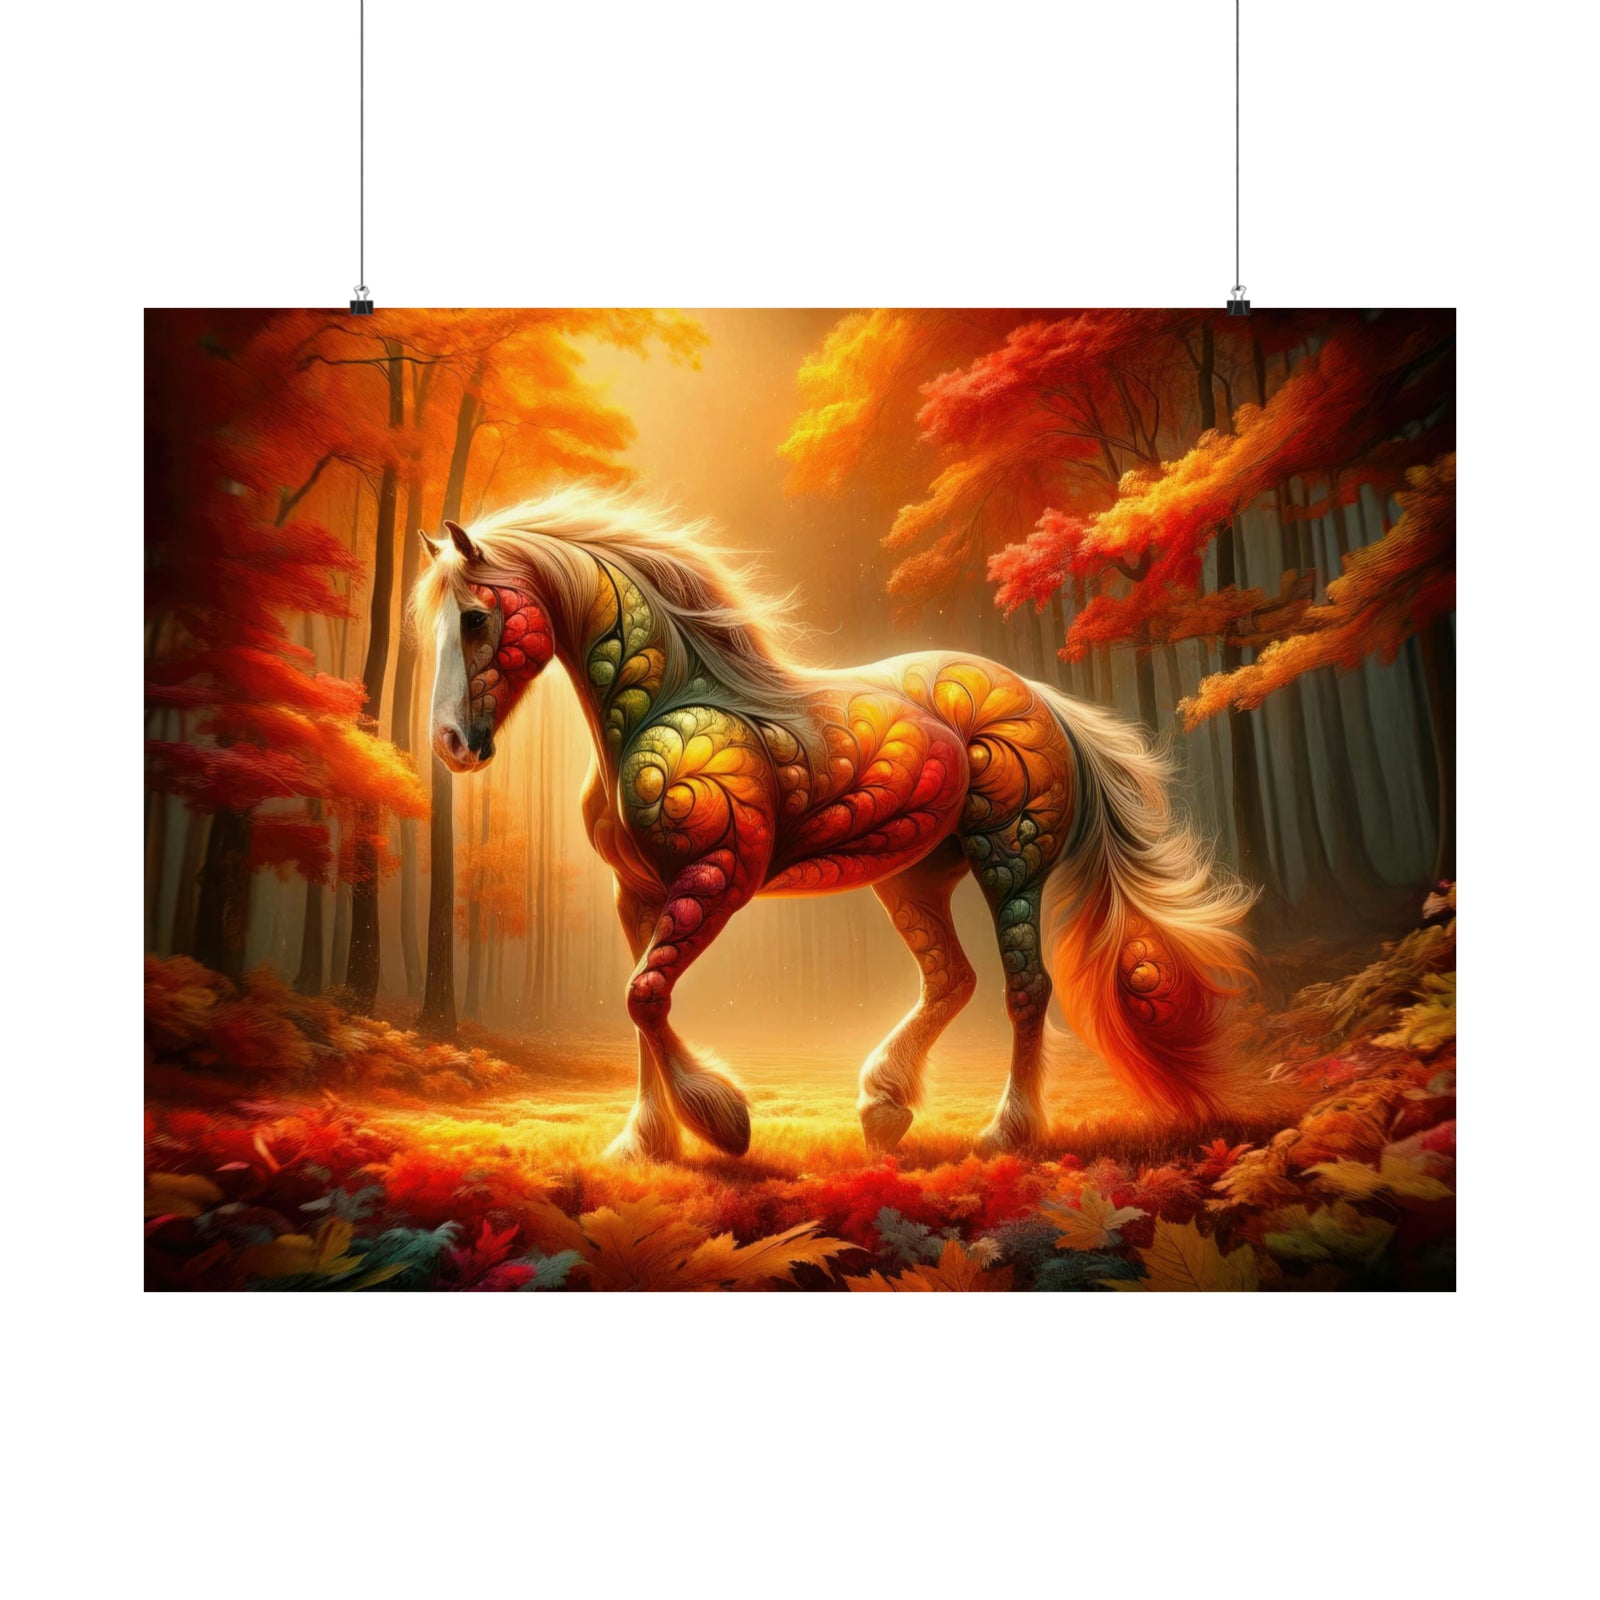 Autumn's Enchanted Steed Poster